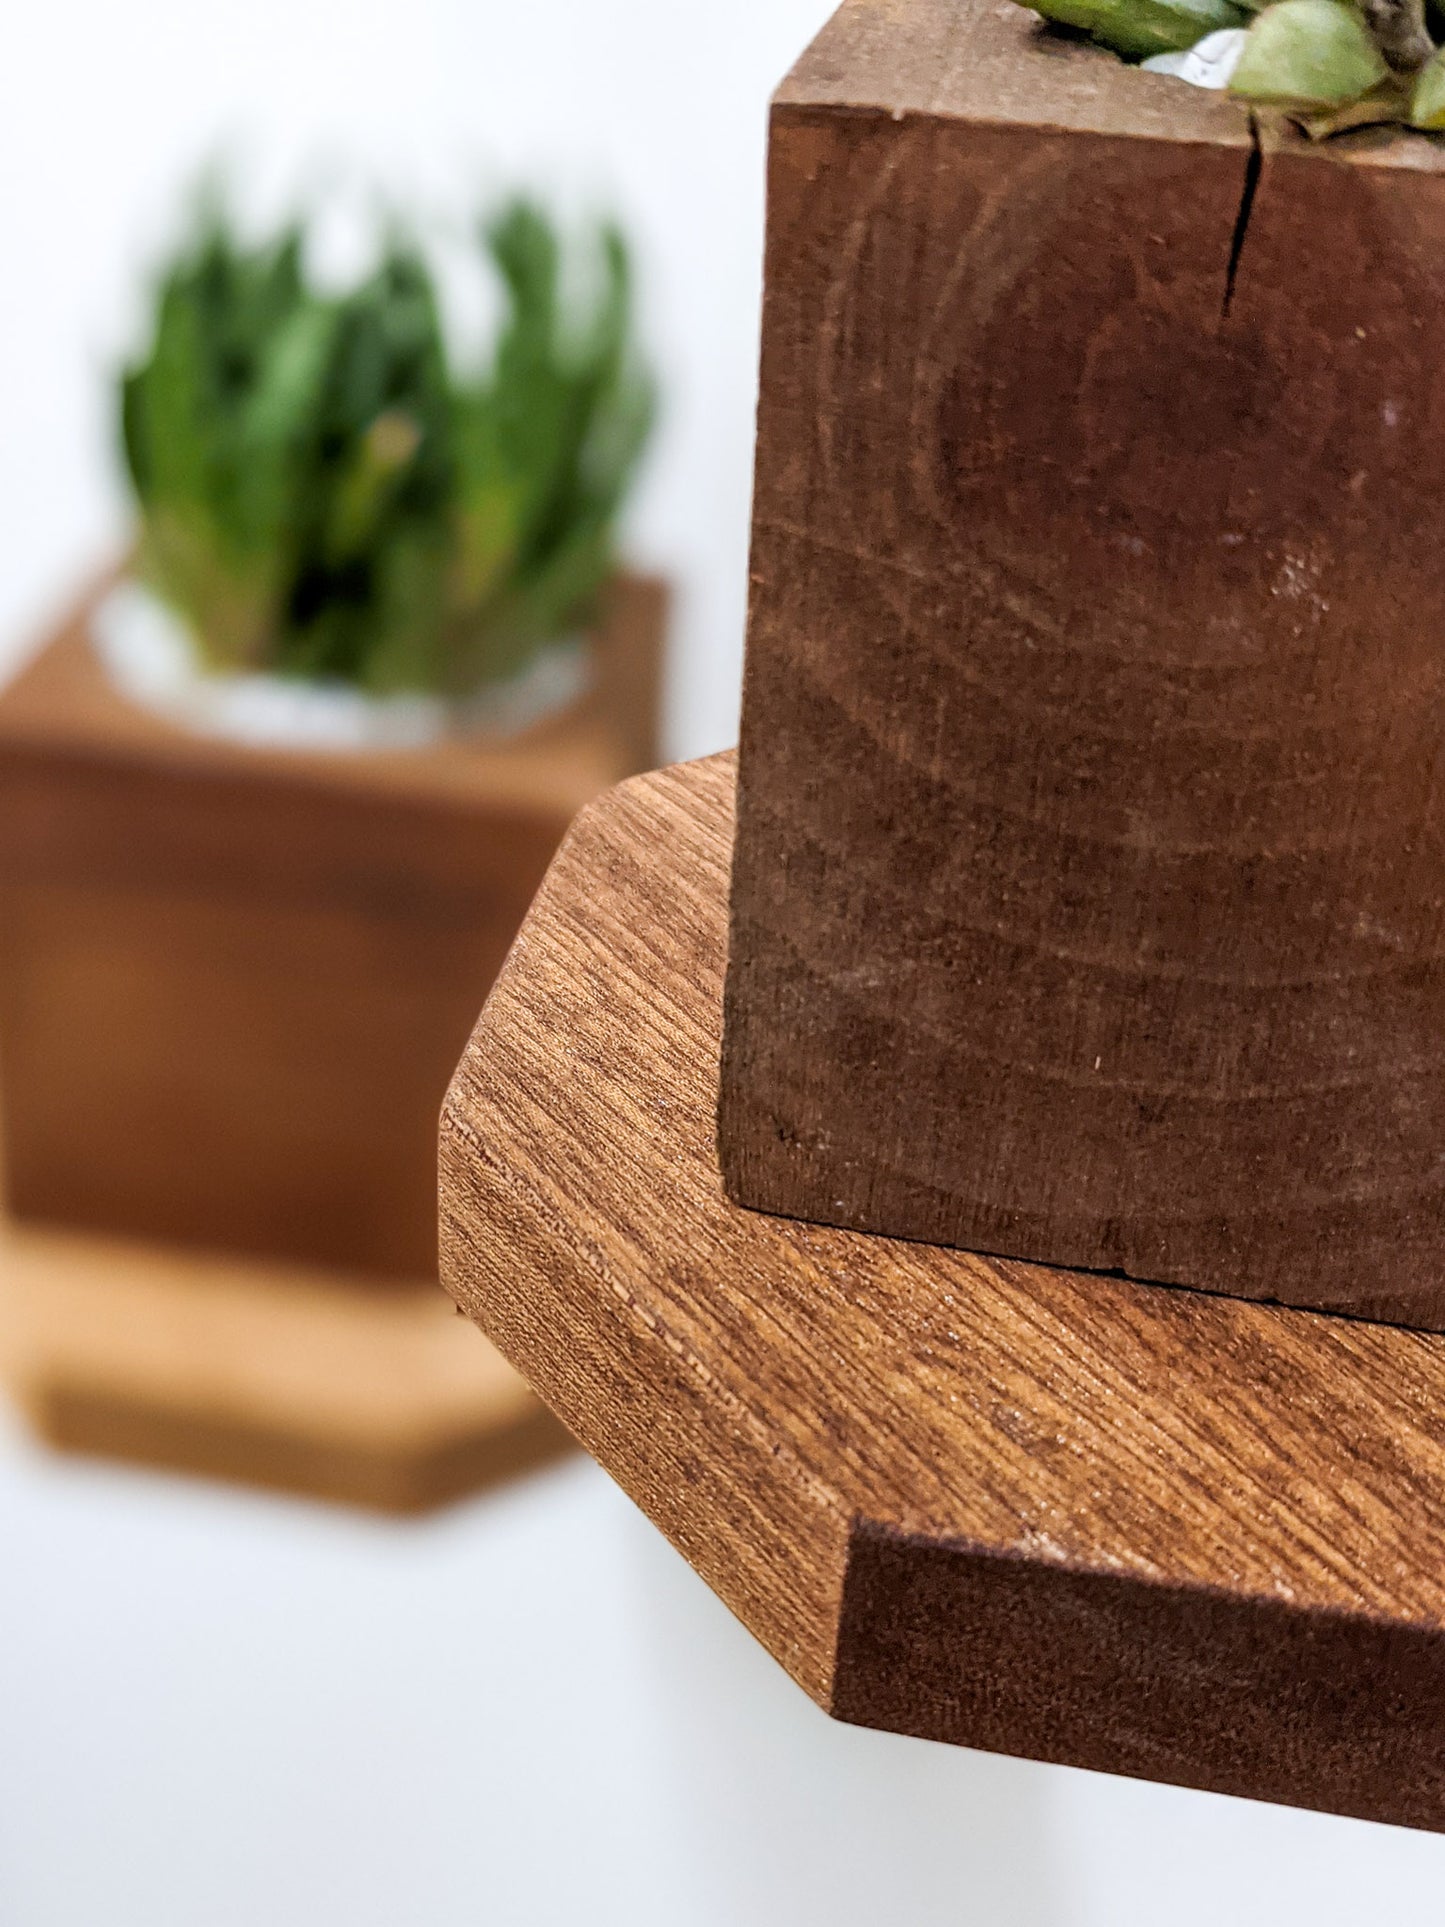 A close-up of the soft rounded edges of our mahogany octagon floating shelf. A square planter sits on top of it. In the background sits an out of focus mahogany floating shelf.